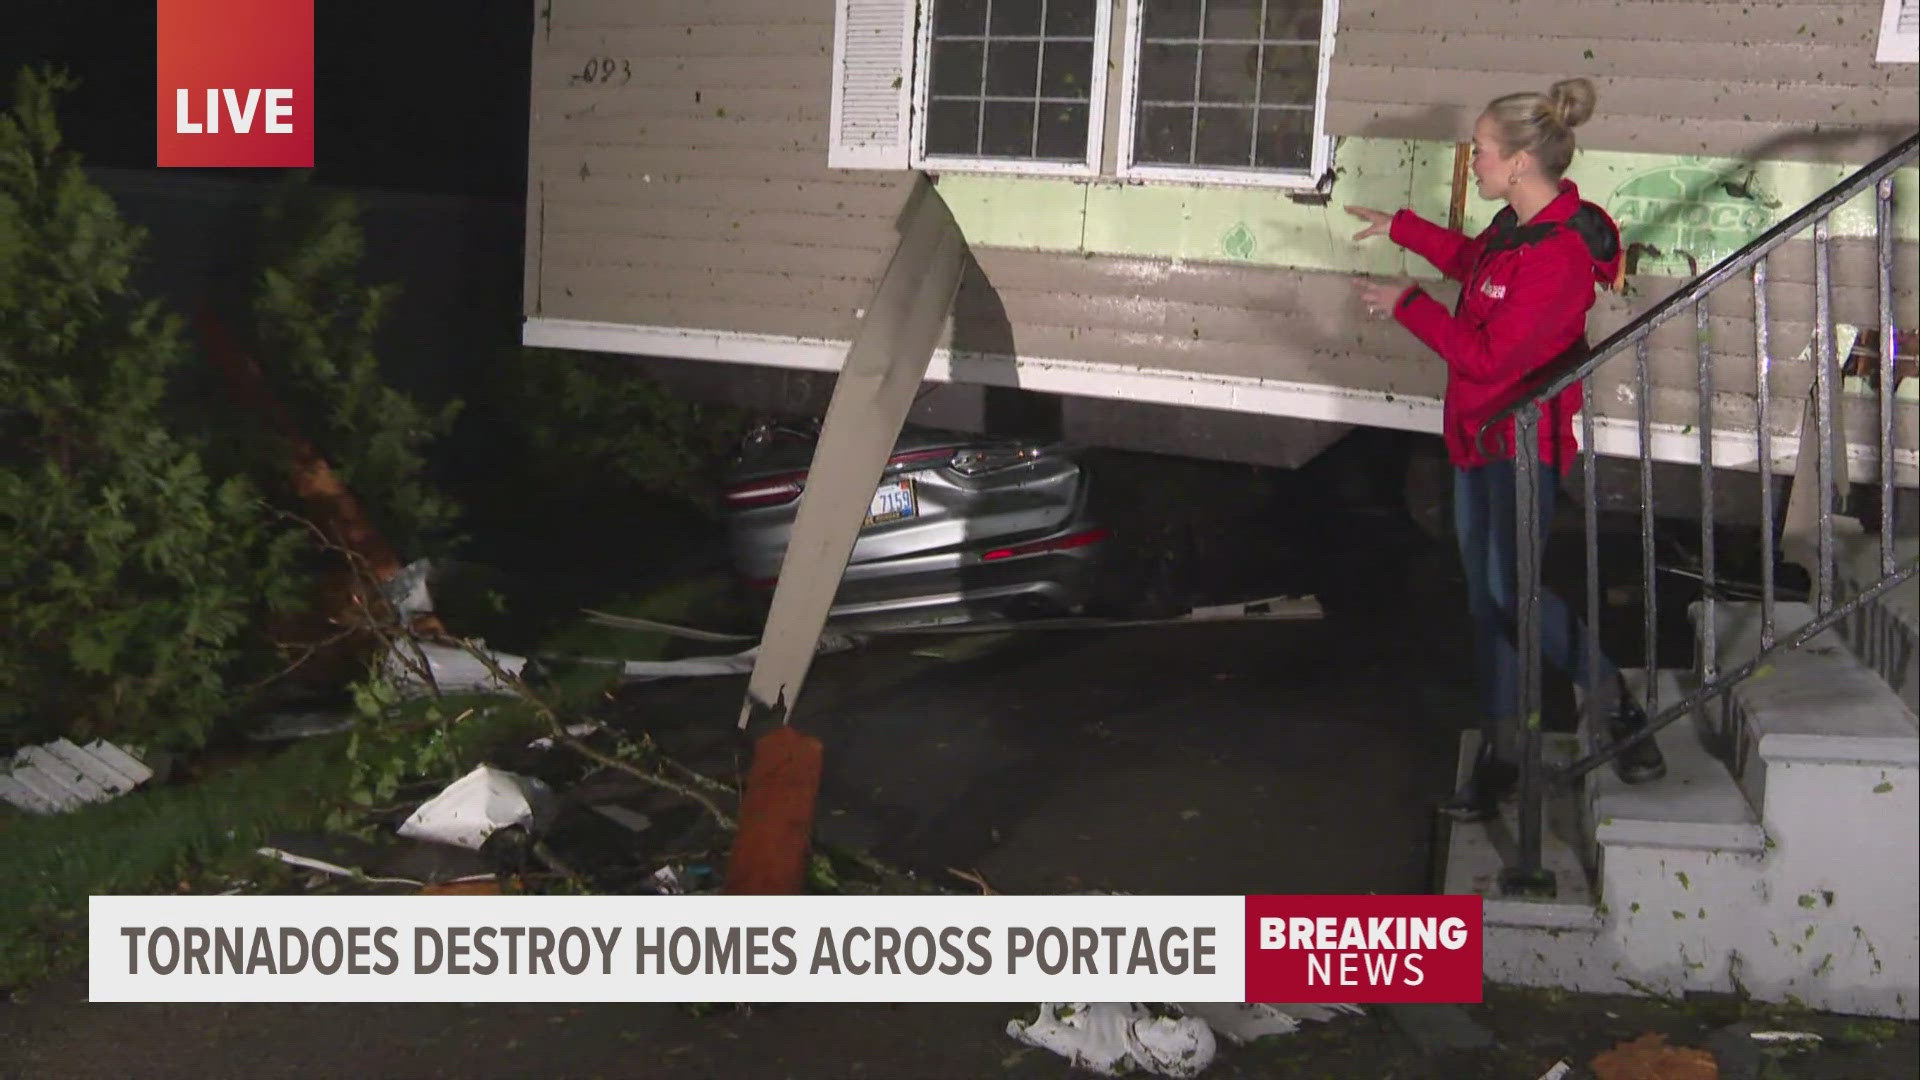 Multiple tornadoes hit the Portage area Tuesday, causing severe damage to homes and businesses.